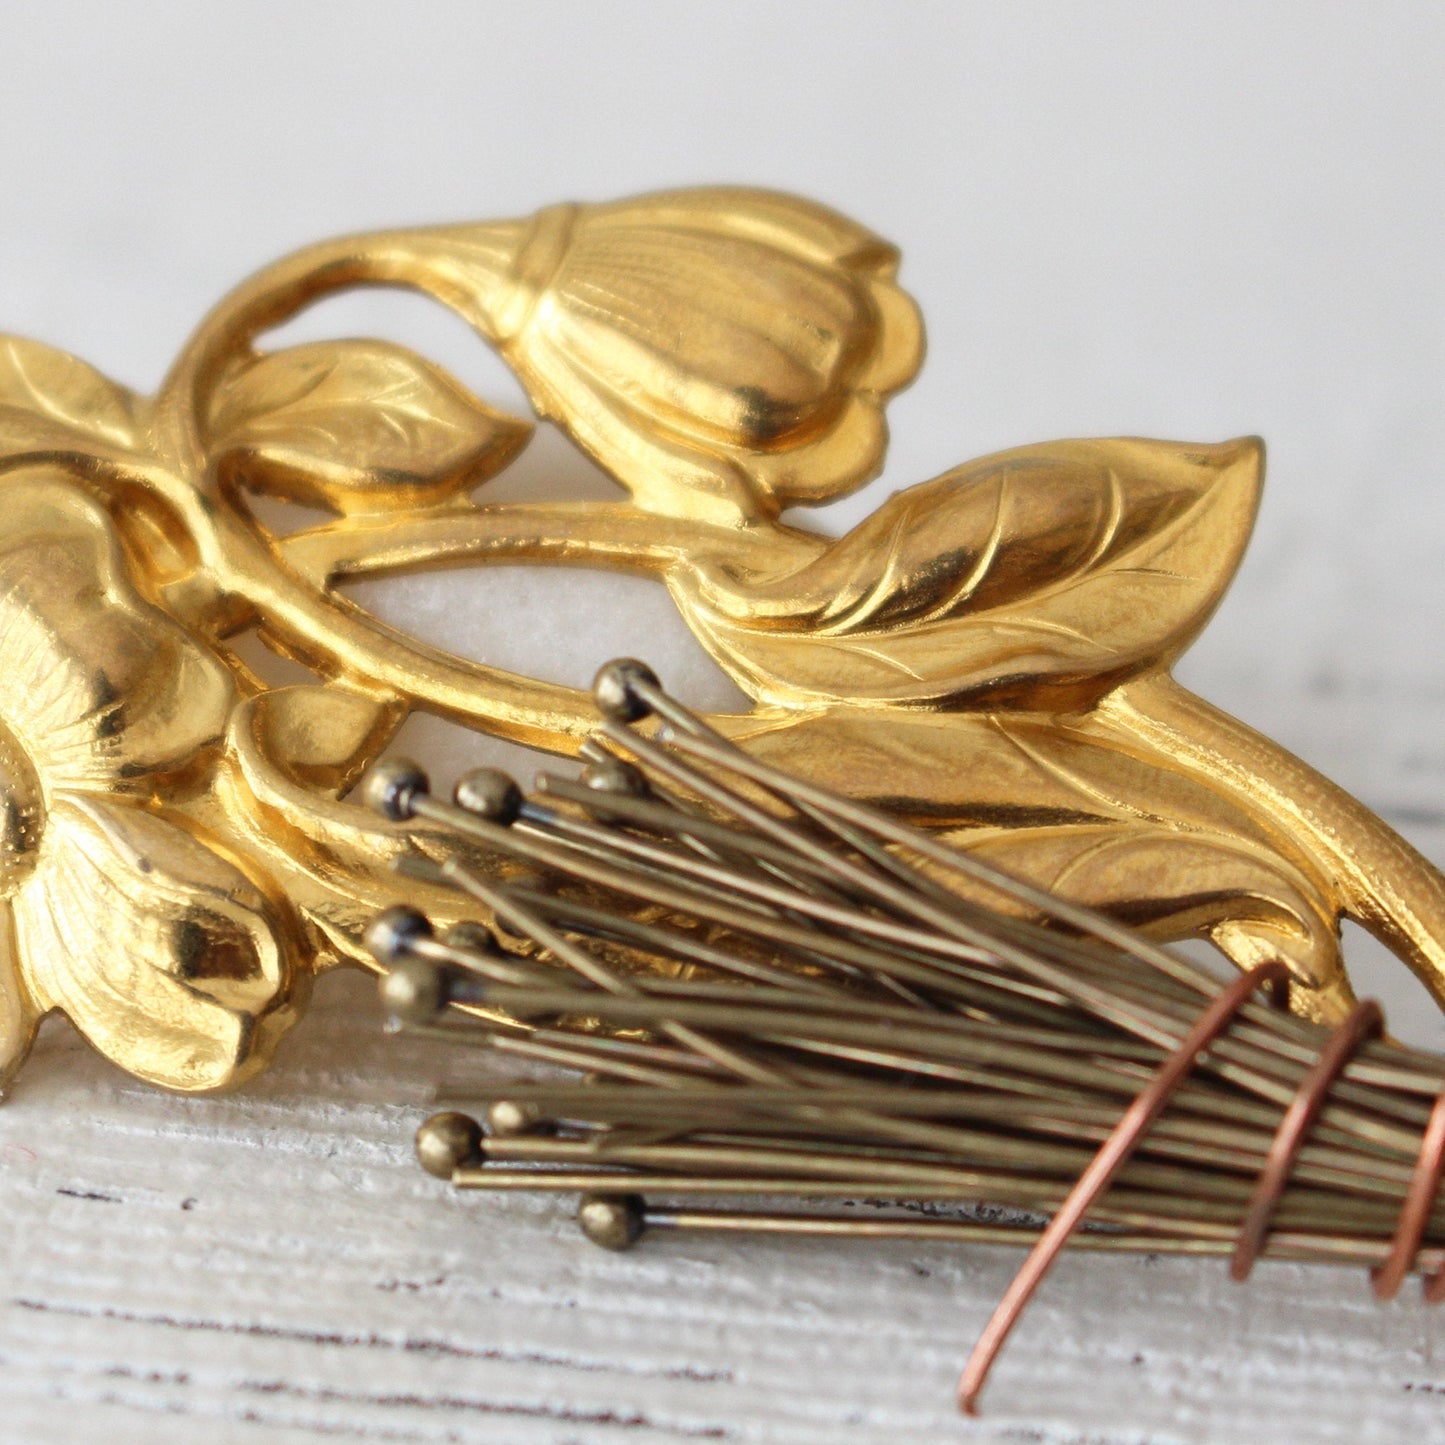 21g Brass Balled Headpins - 2 and 3 inch - 30 pieces